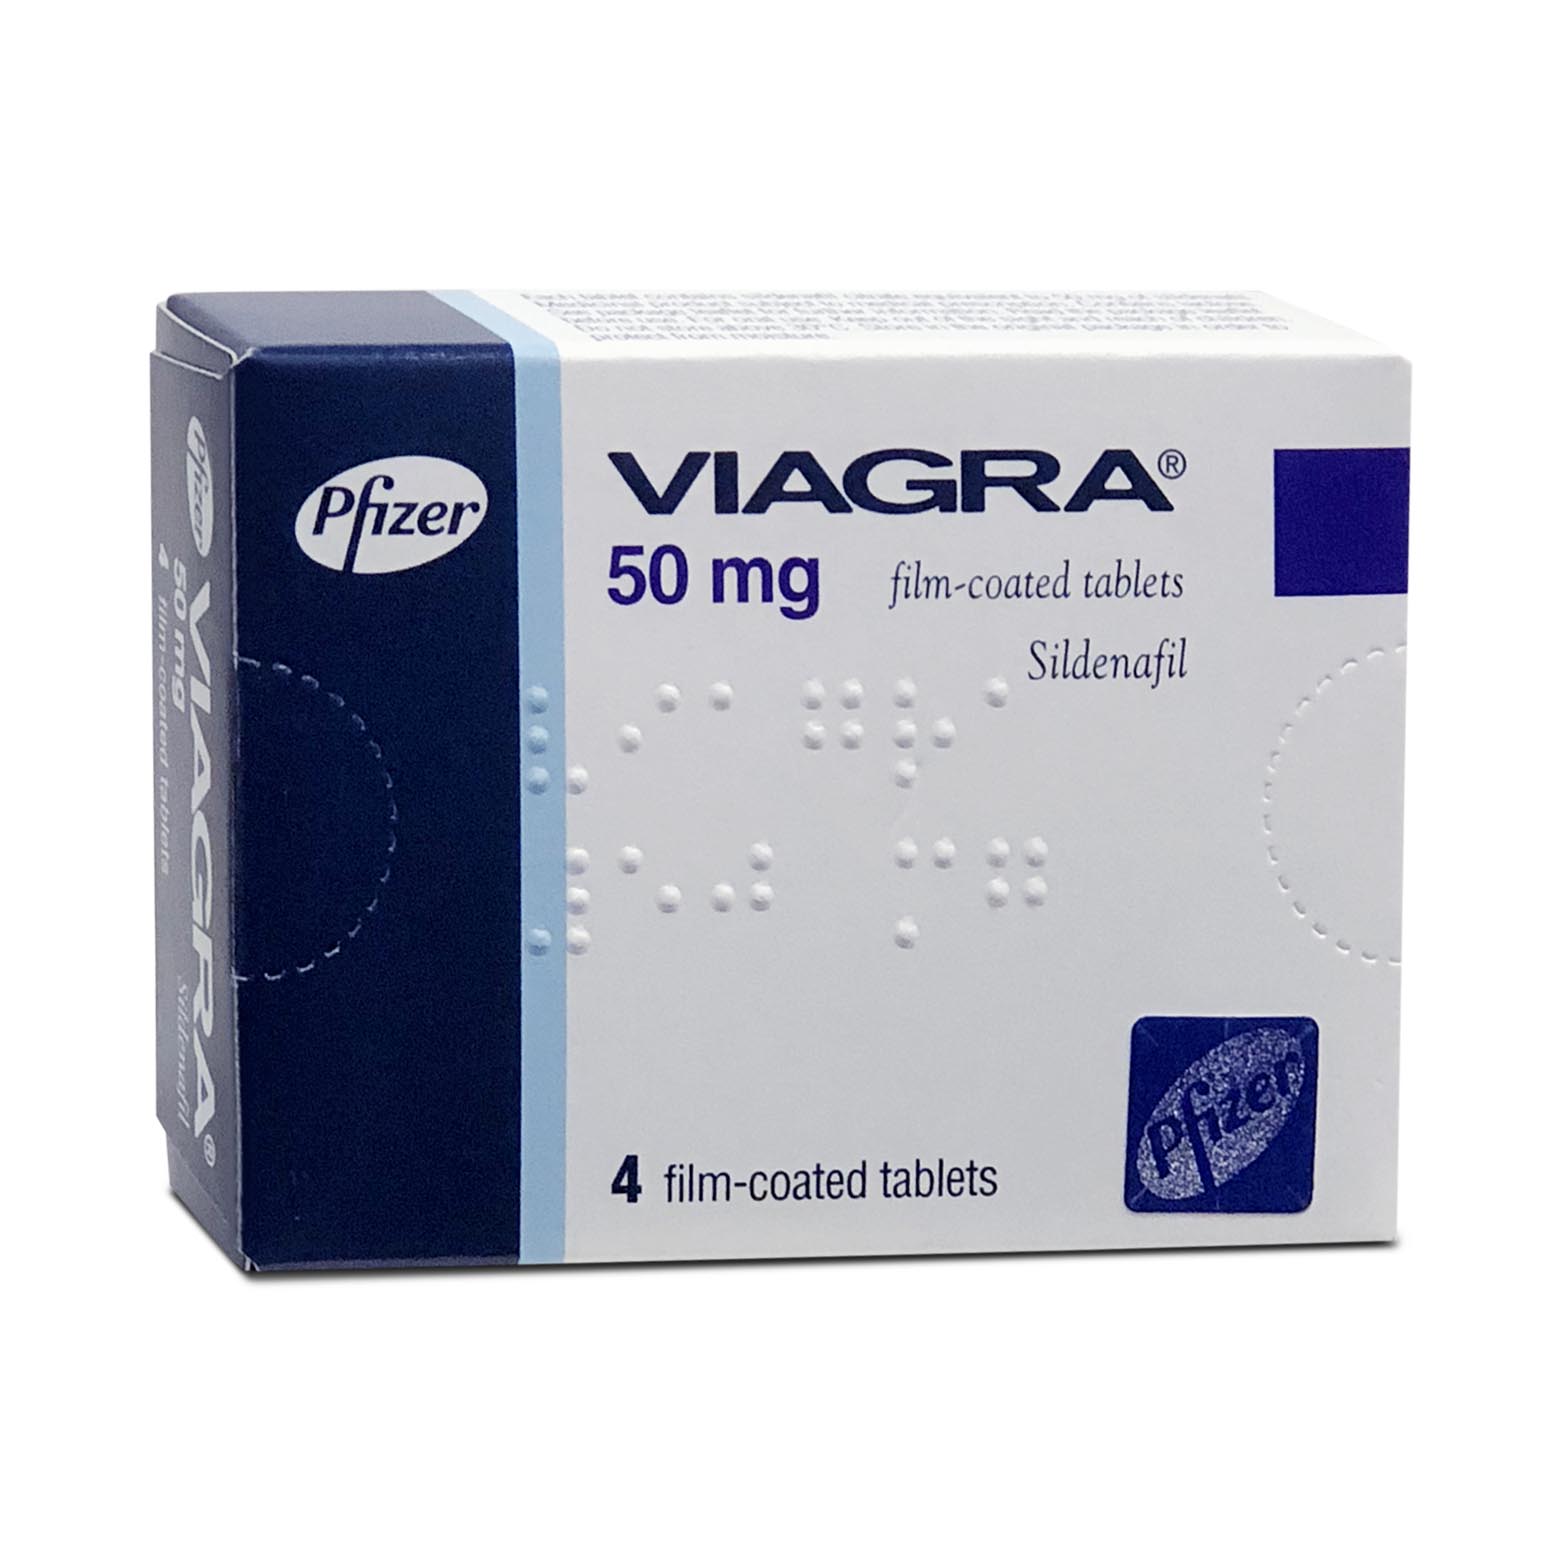 where to buy viagra | viagra for sale uk | buy viagra online over $250 delivery free